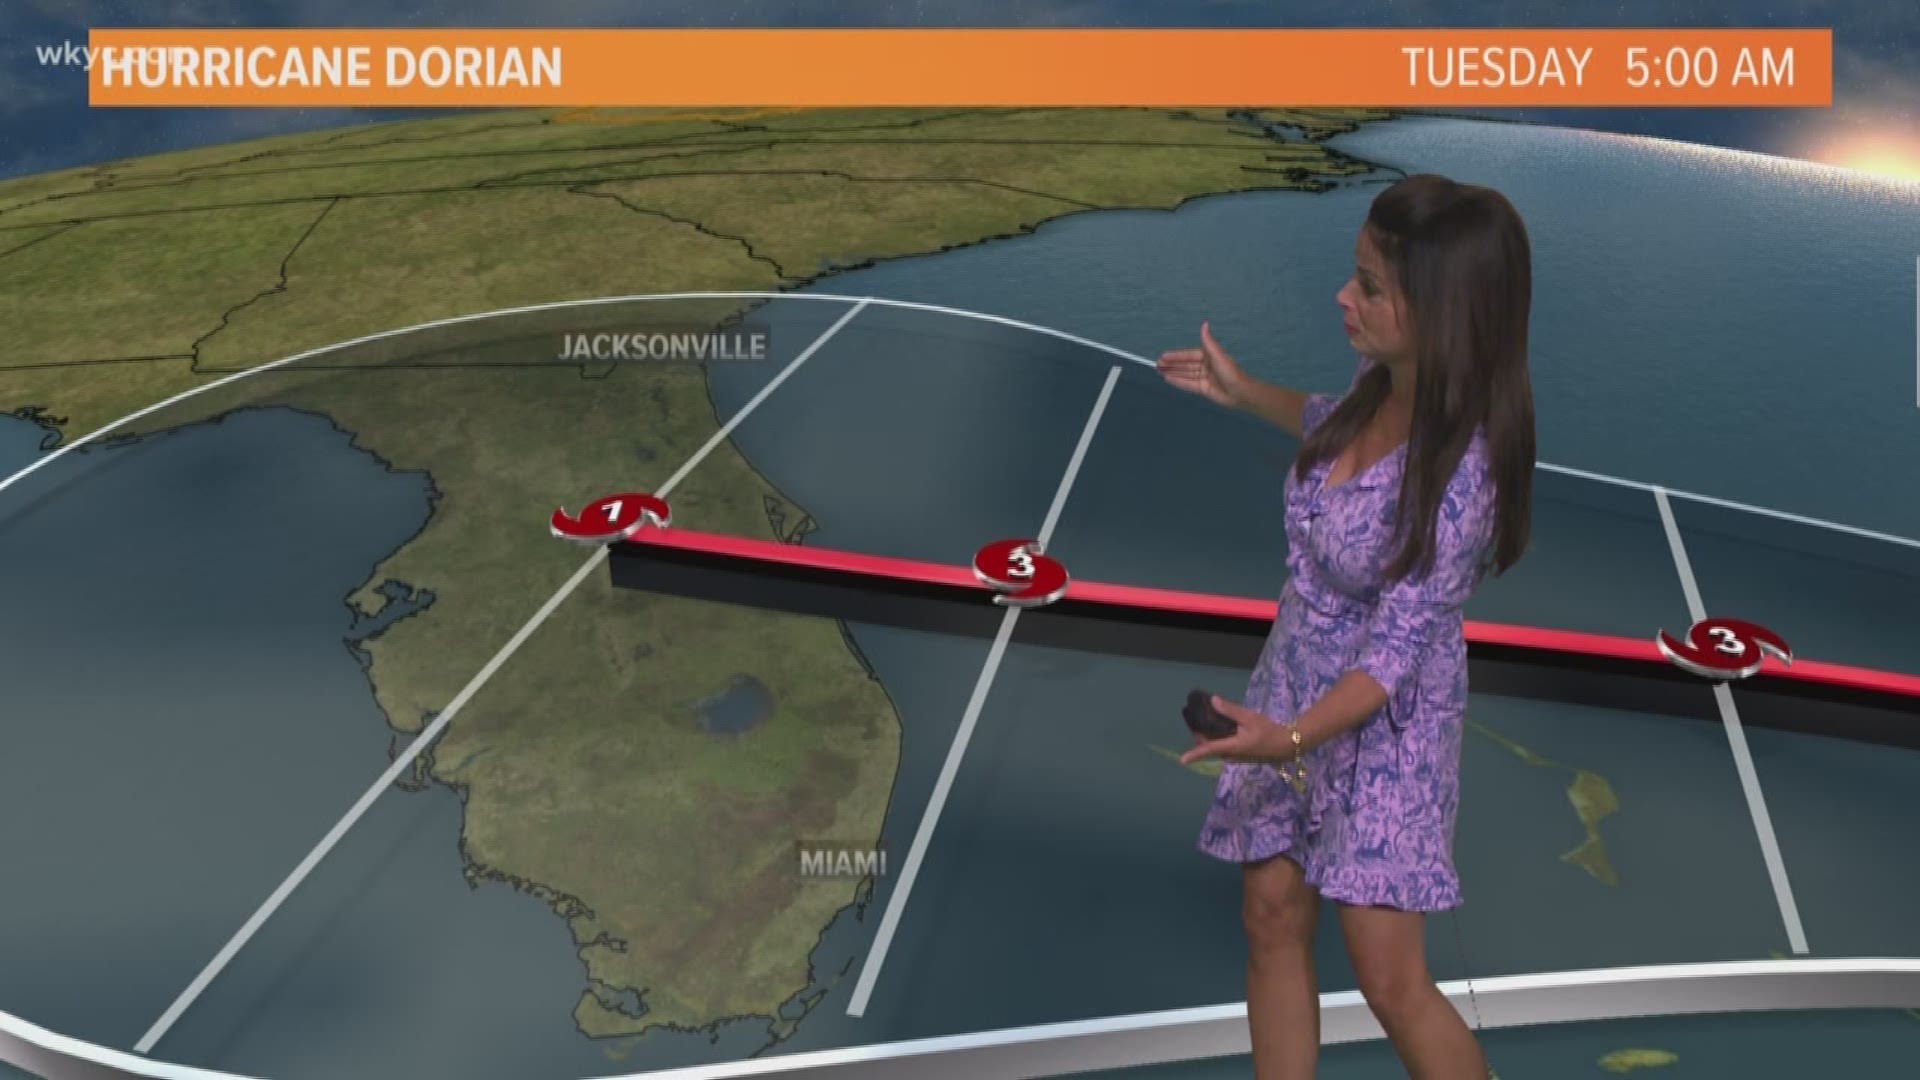 Aug. 29, 2019: We're keeping a close eye on the Florida coast as Hurricane Dorian moves closer. WKYC's Hollie Strano has a look at the current path Dorian is taking and the impact it could have on Florida.